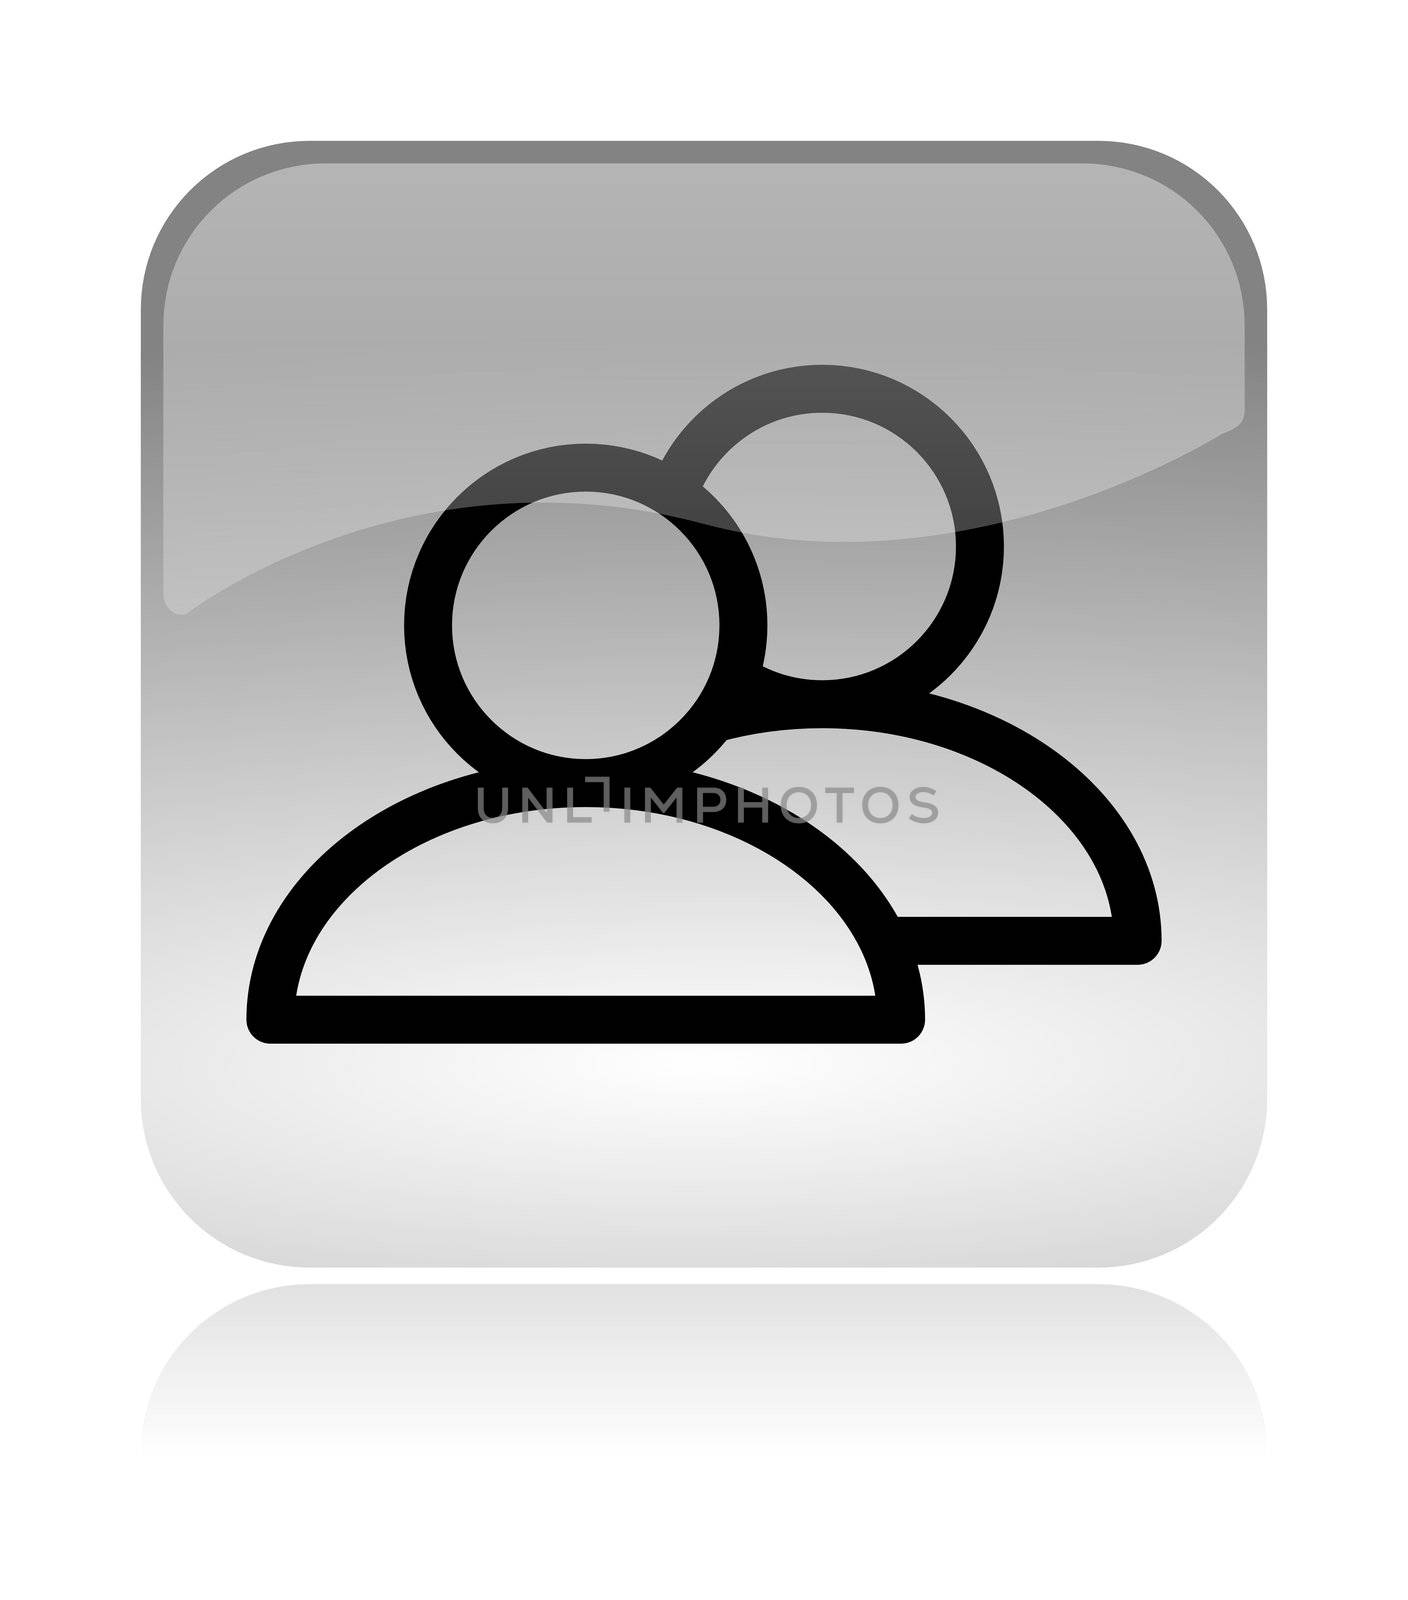 Group users white, transparent and glossy web interface icon with reflection